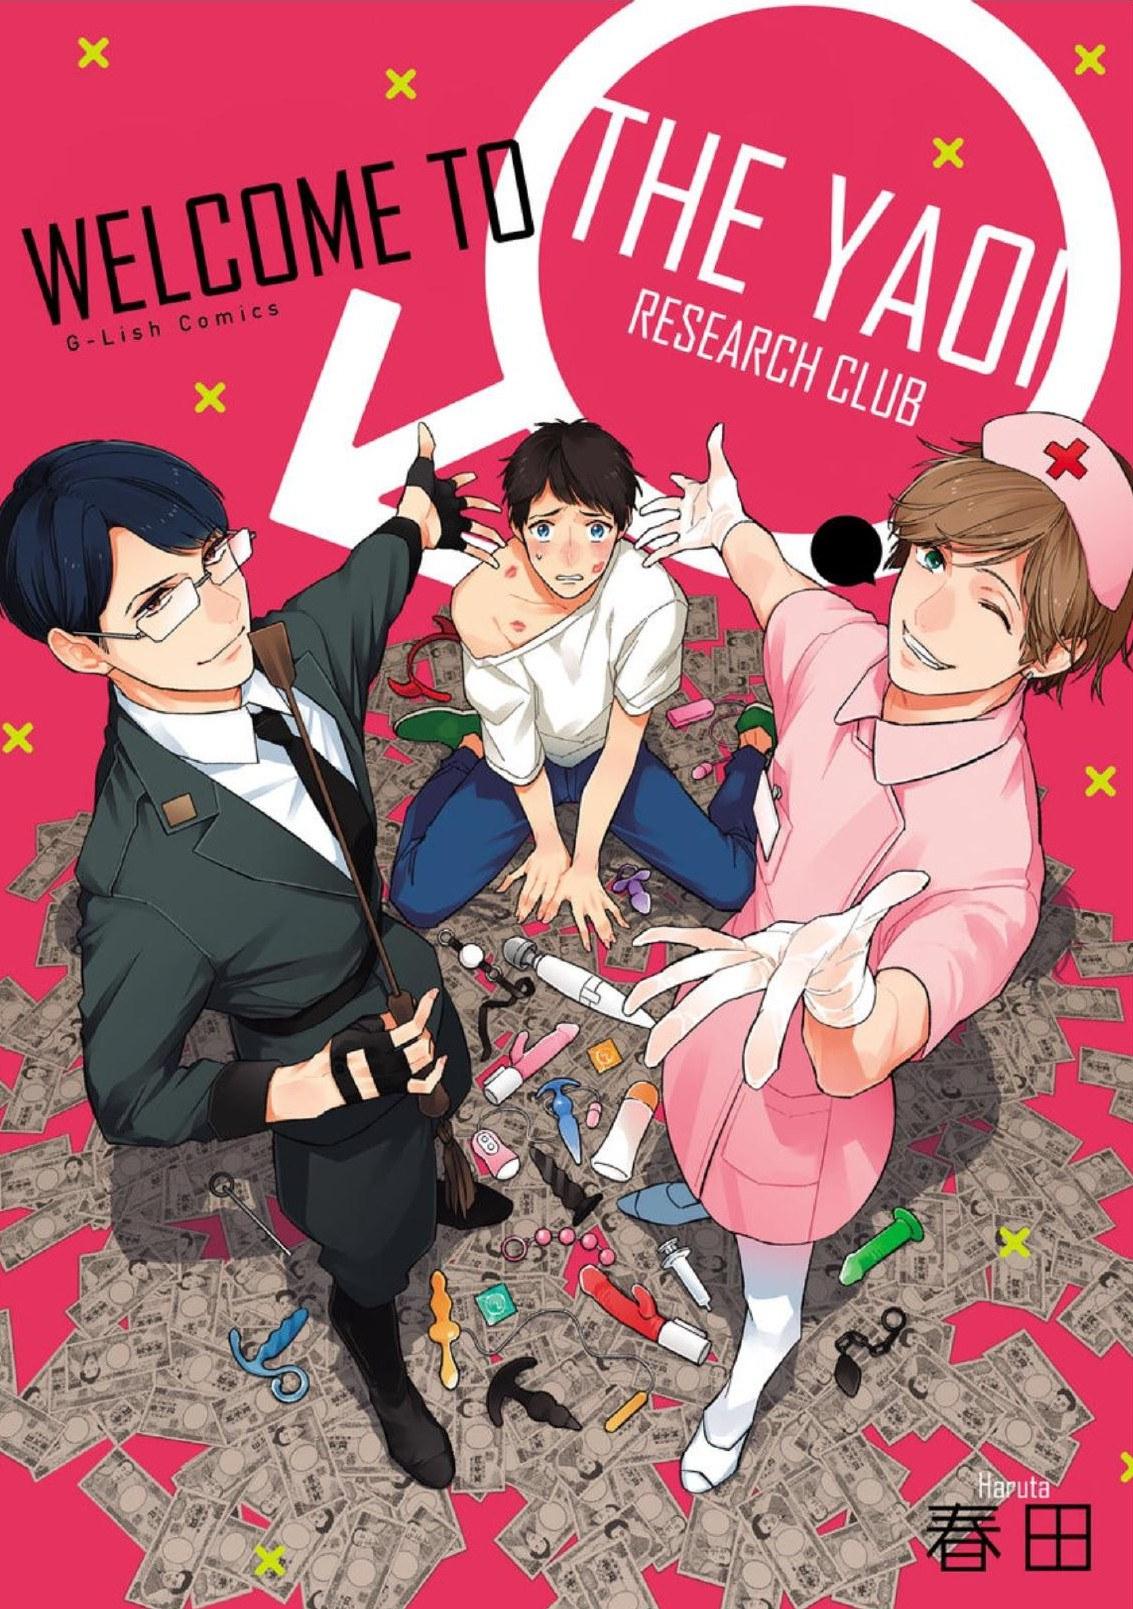 Welcome to The Yaoi Research Club 01 0